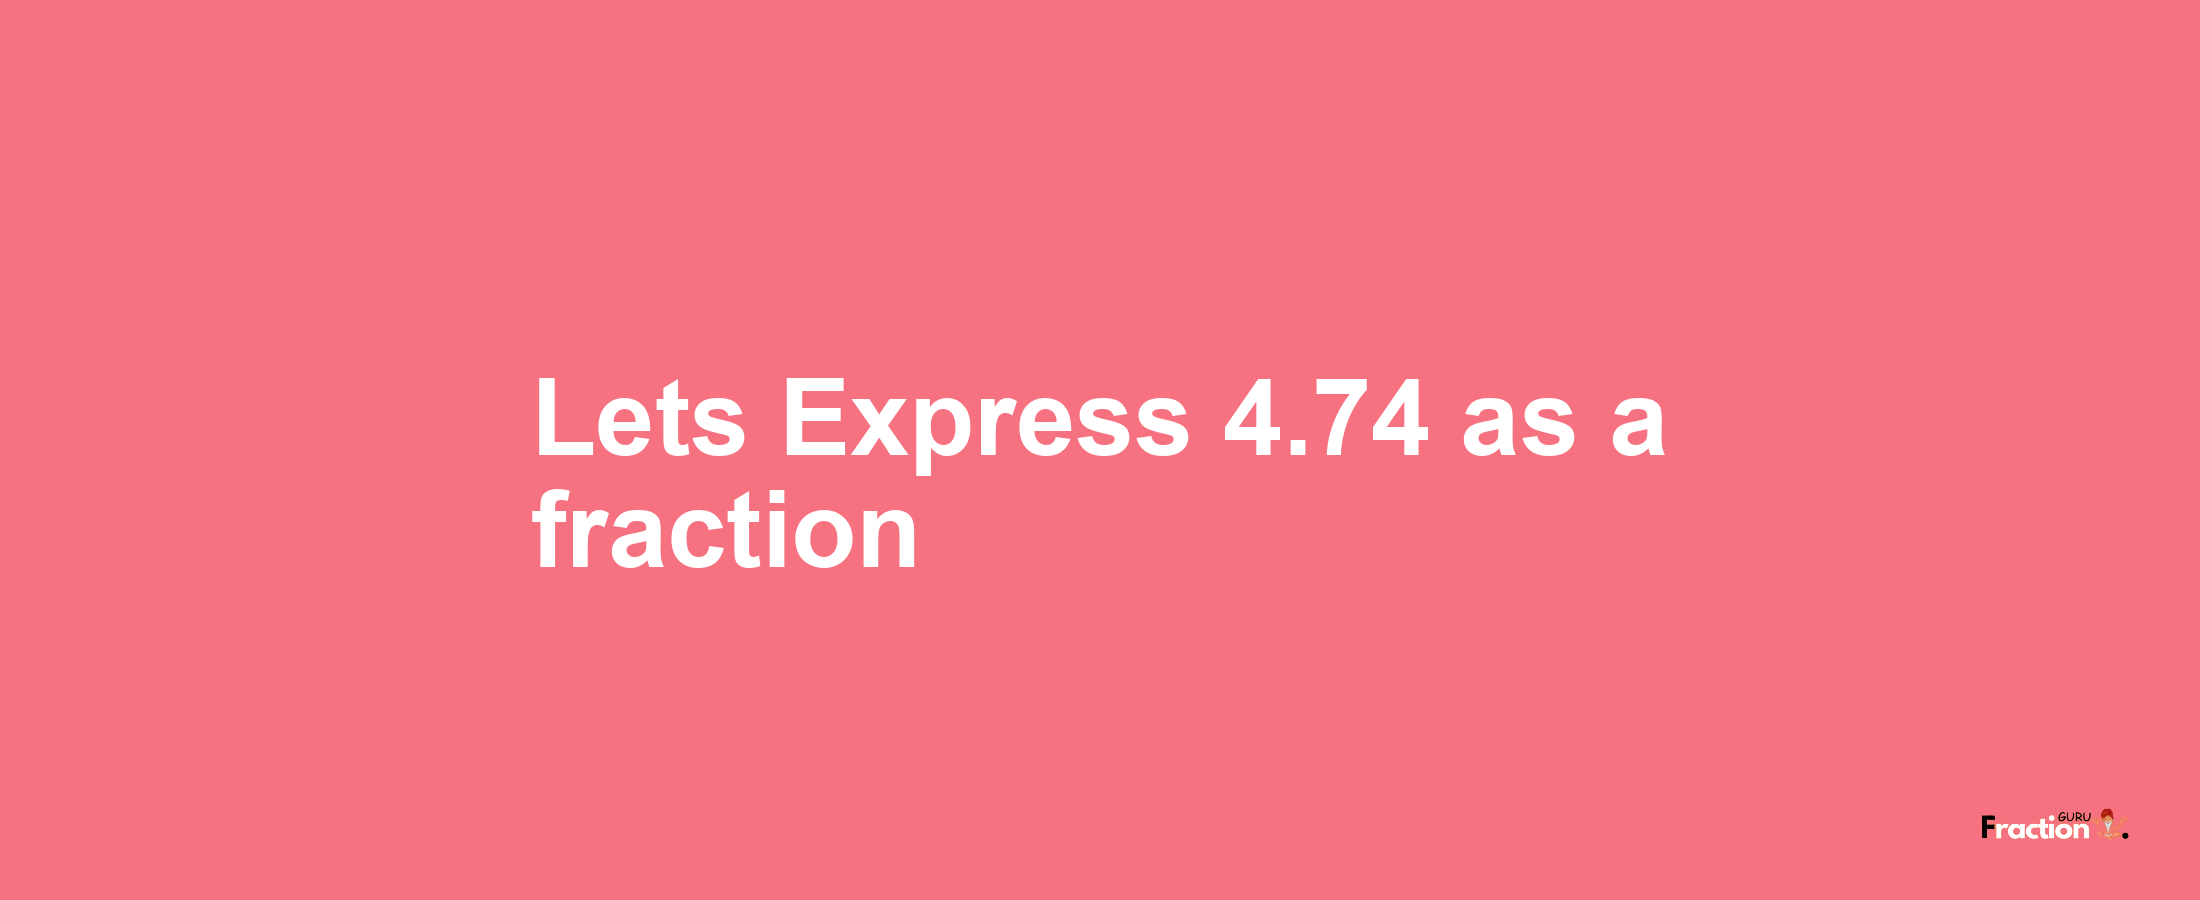 Lets Express 4.74 as afraction